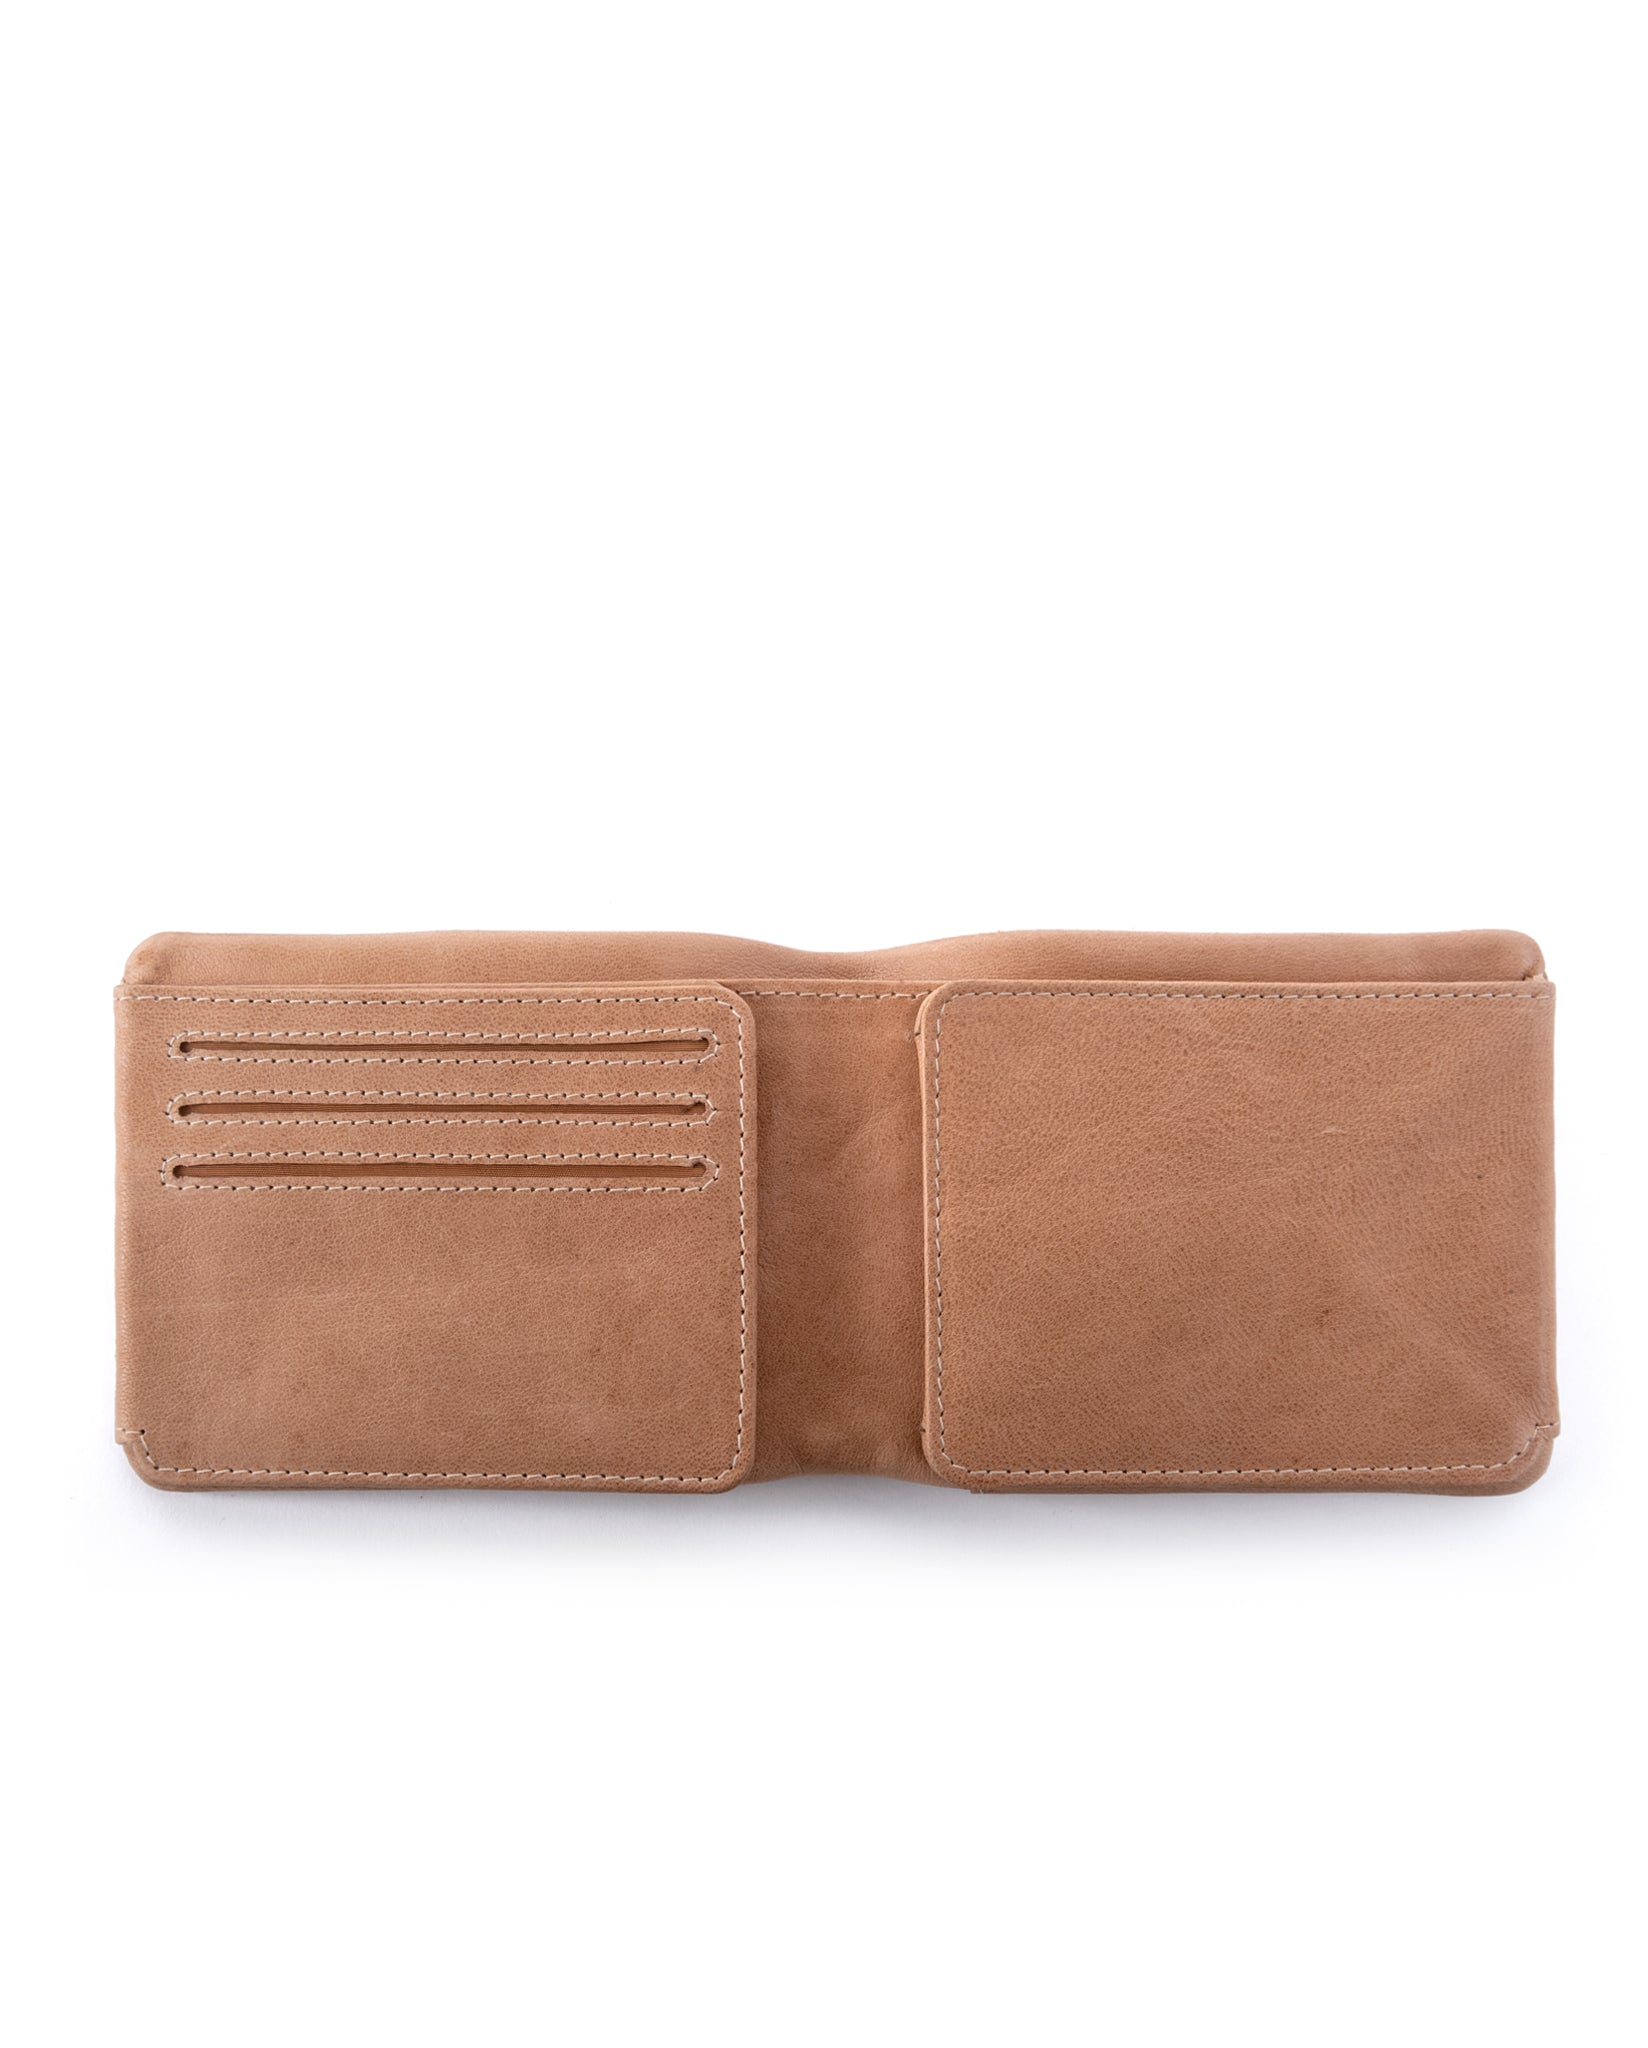 Soft wallet classic